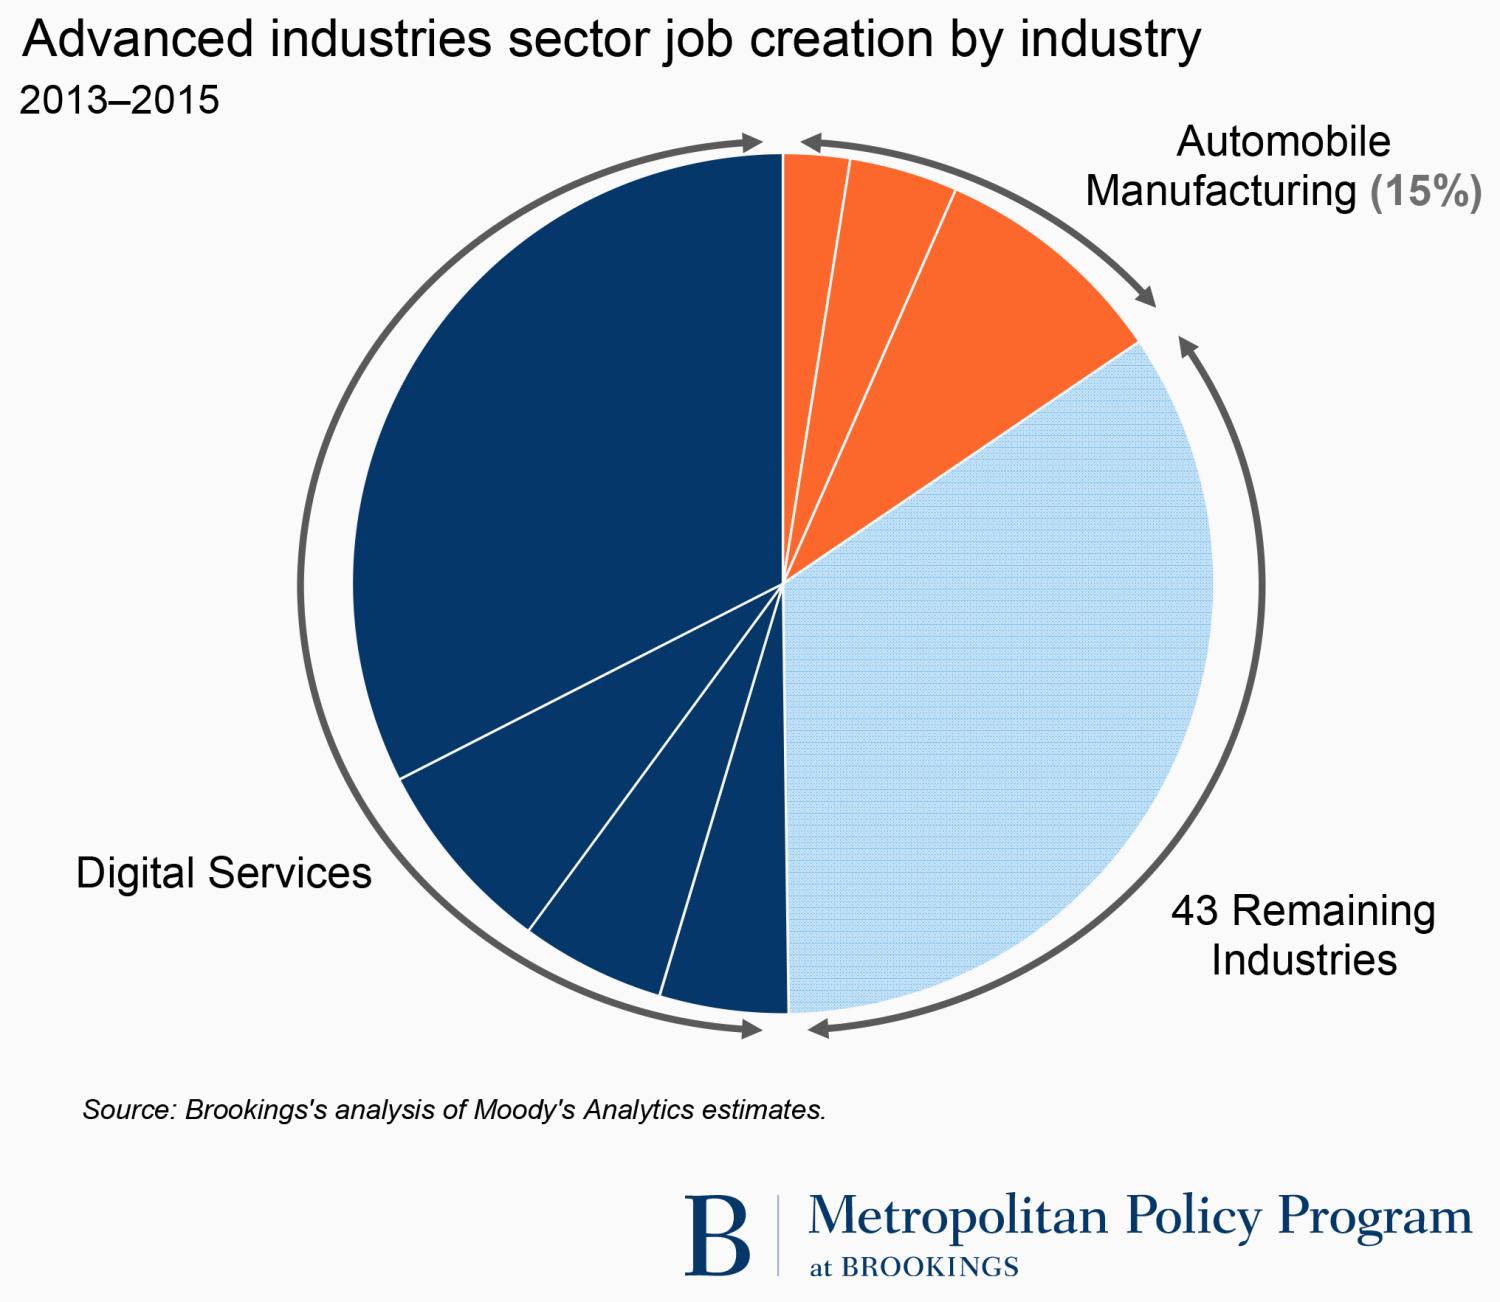 Advanced industries sector job creation by industry